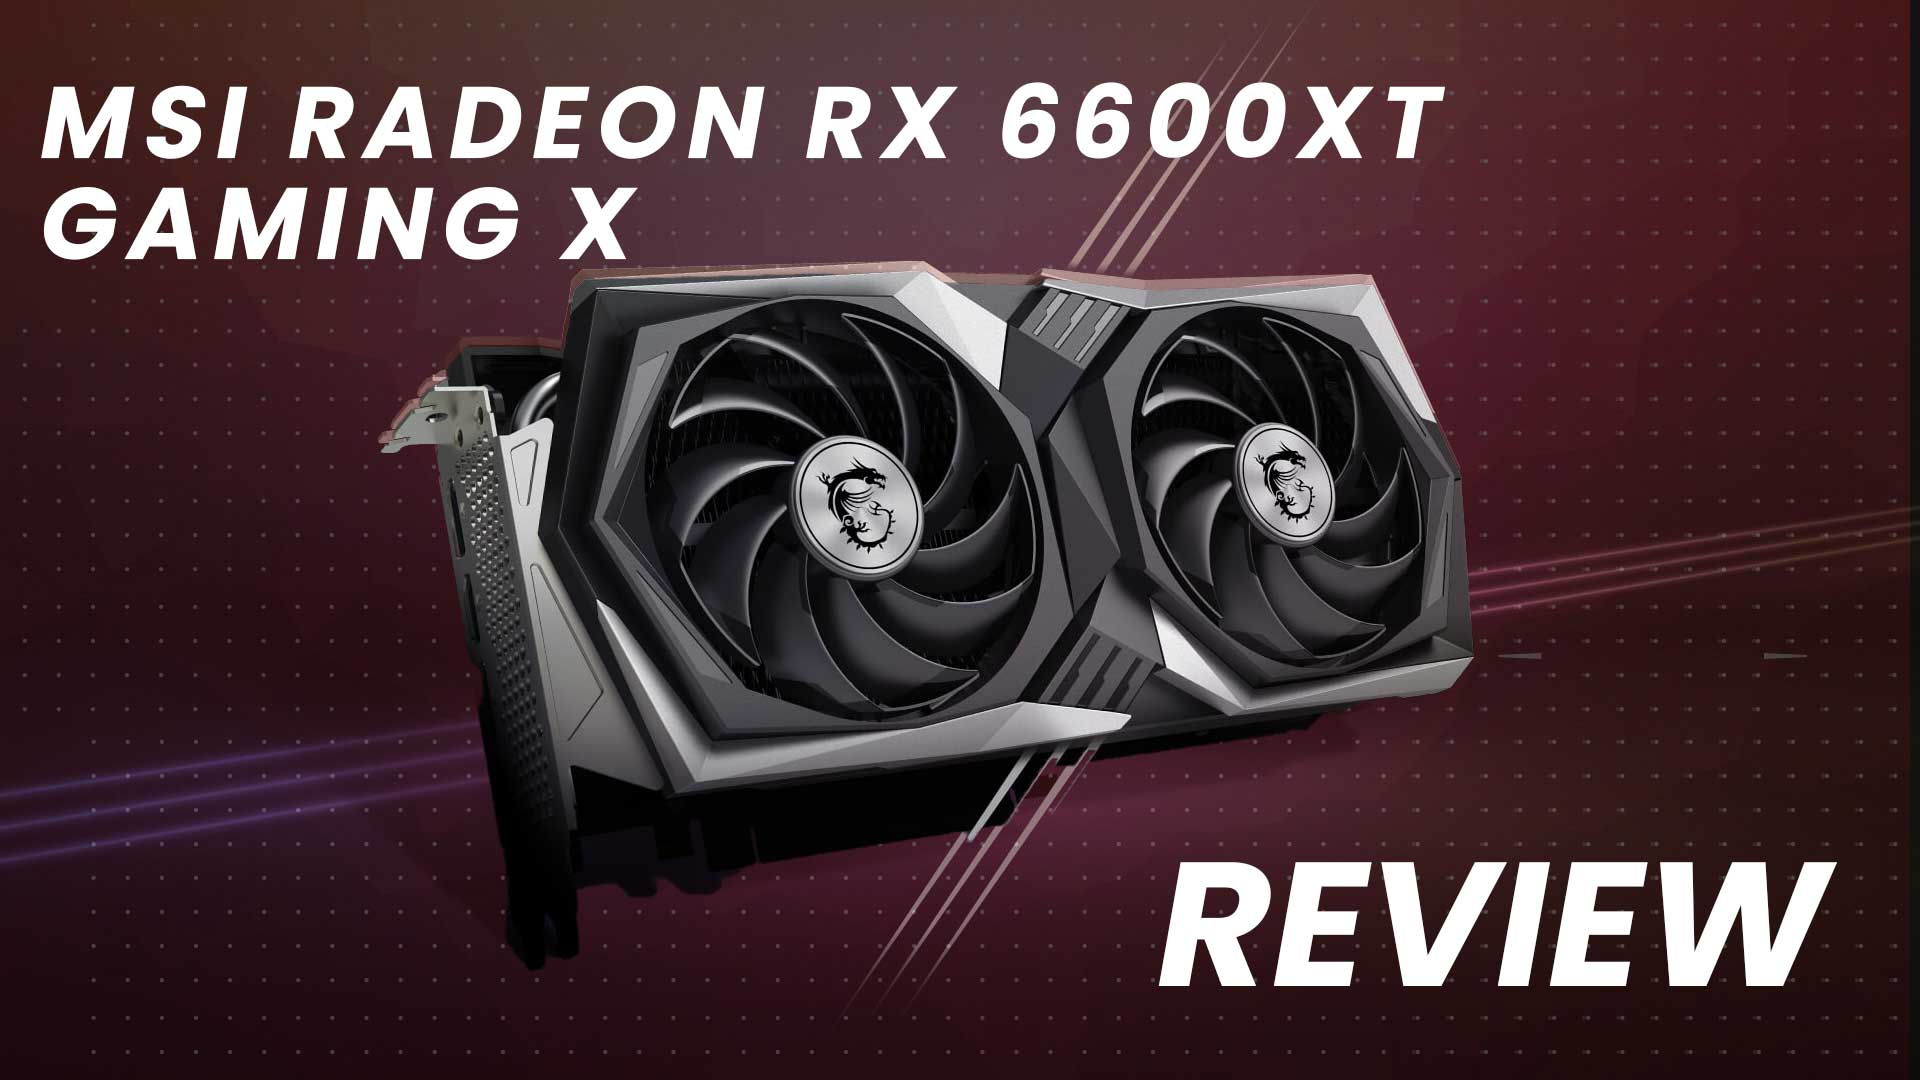 AMD Radeon RX 6600 XT Graphics Cards Announced for 1080p Gaming